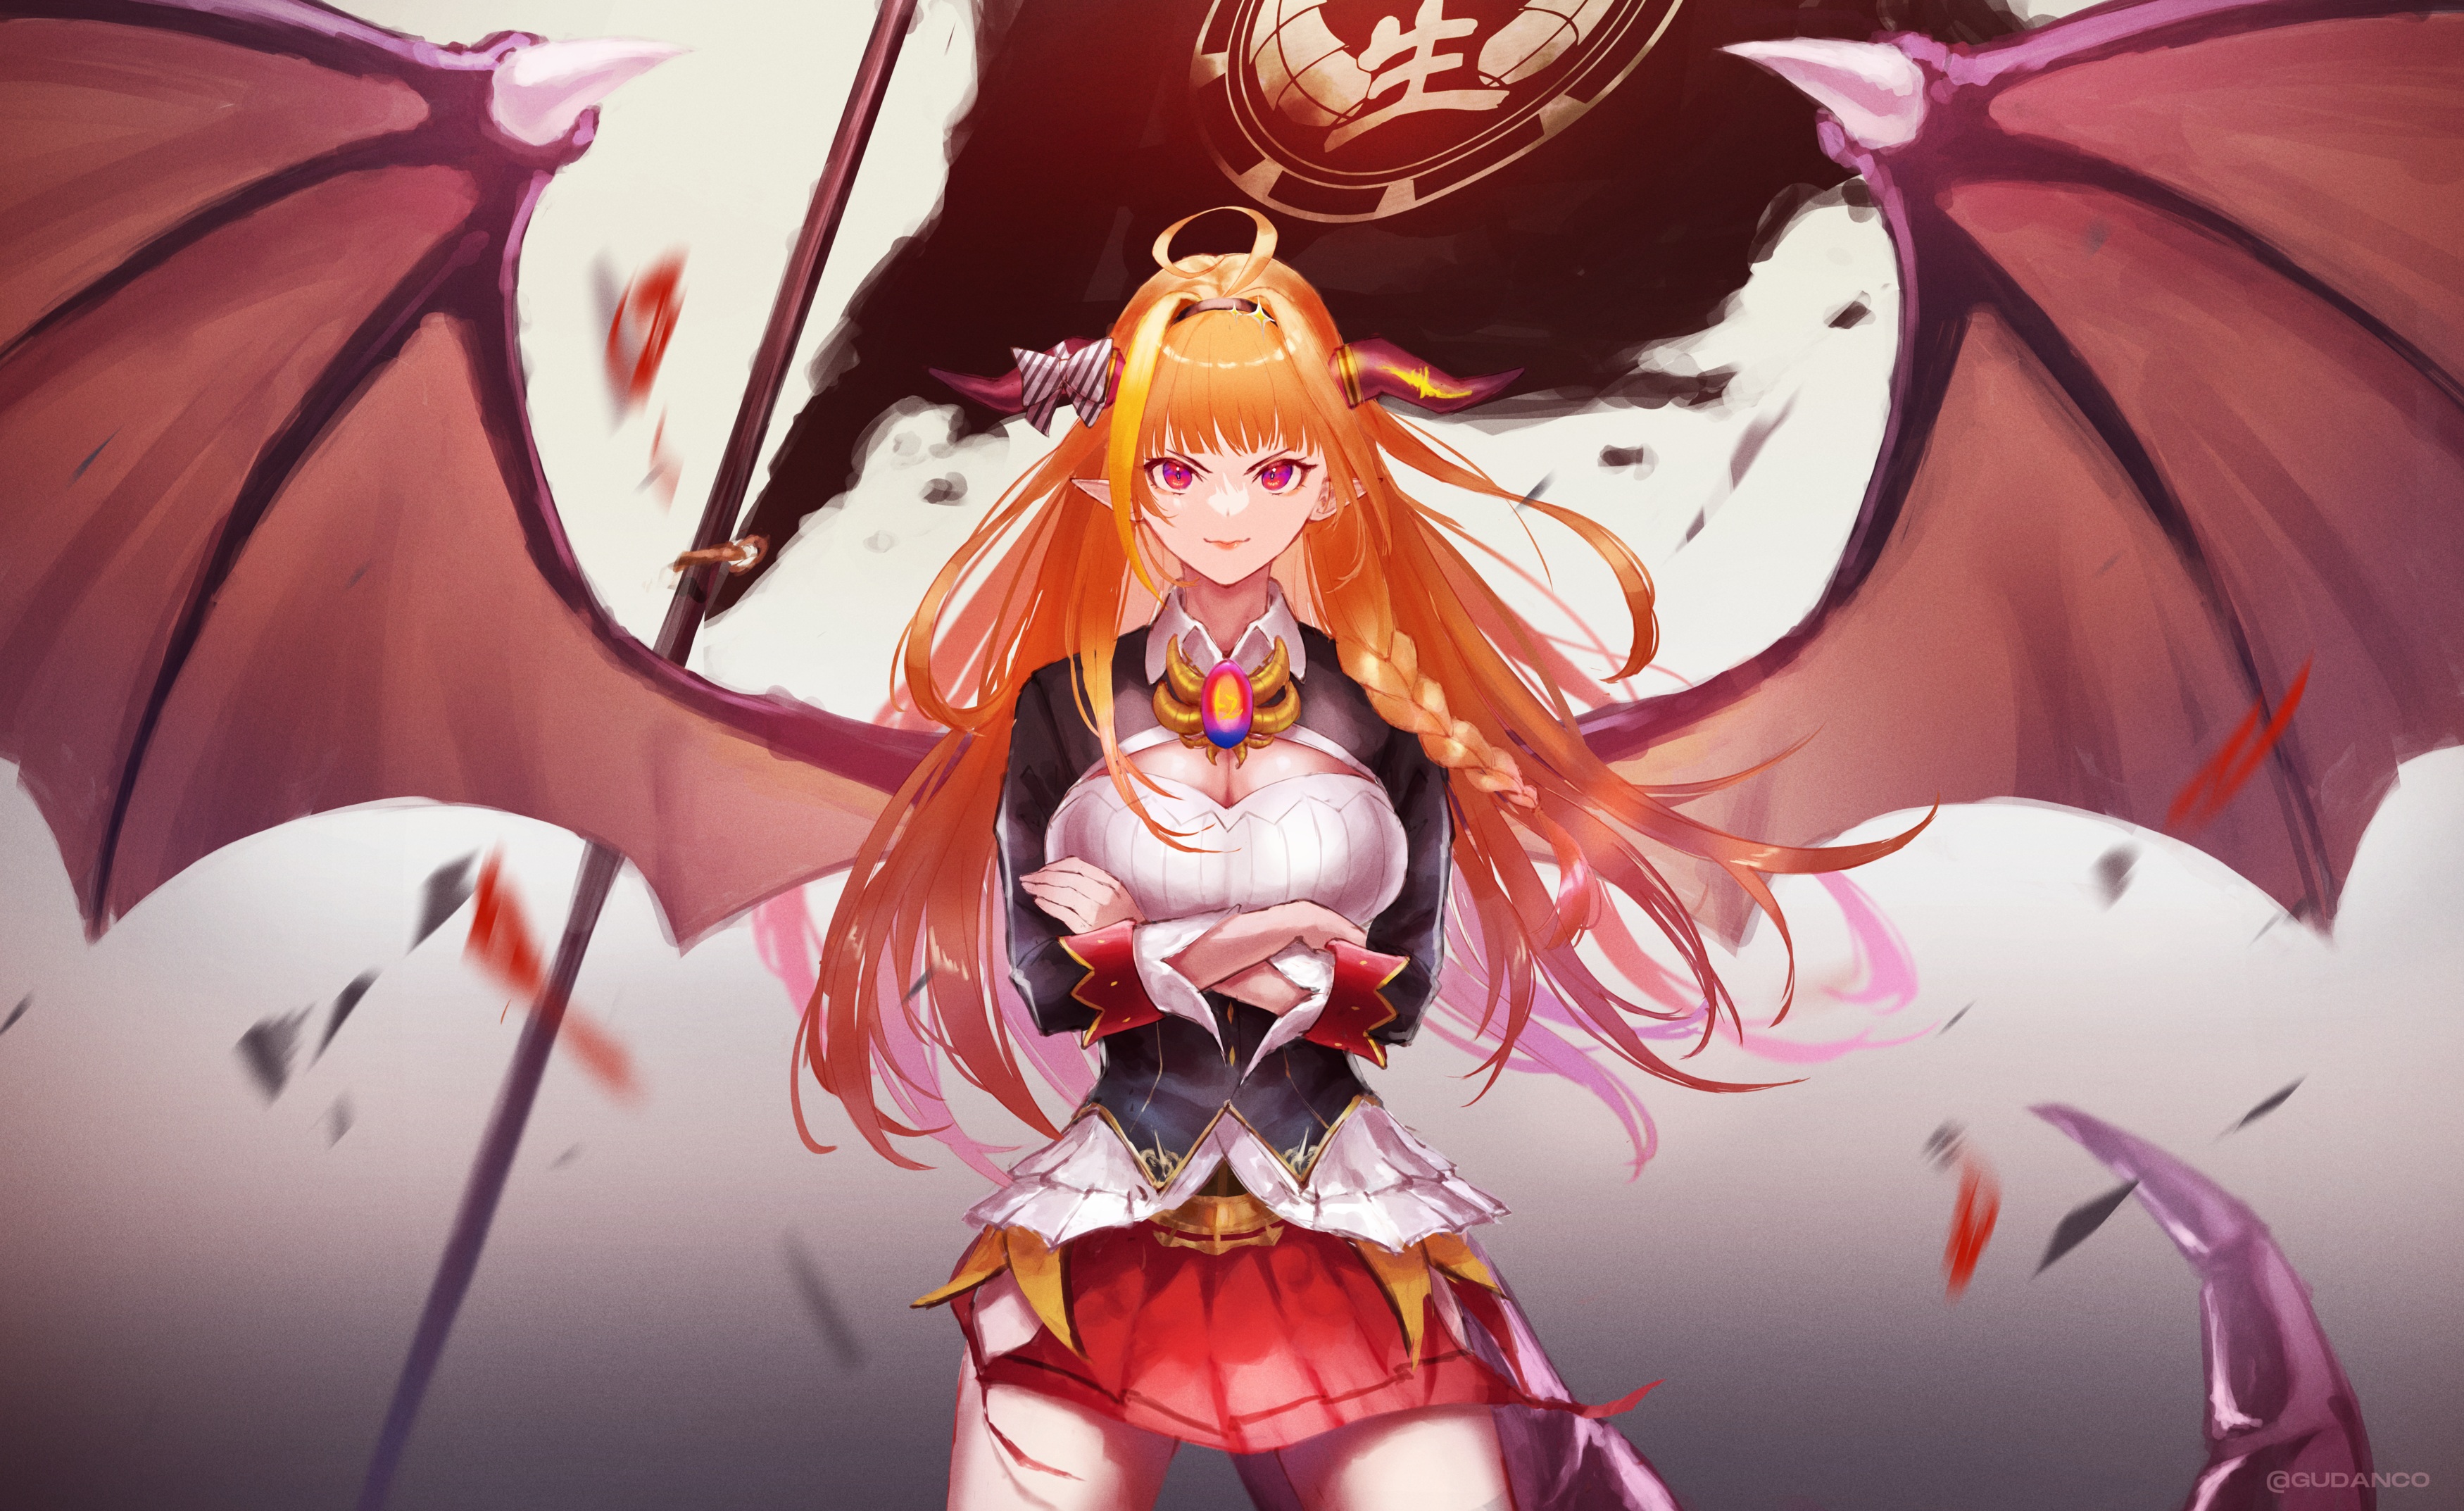 Anime 3500x2146 anime anime girls Hololive Virtual Youtuber Kiryu Coco dragon girl horns pointy ears wings tail blonde red eyes